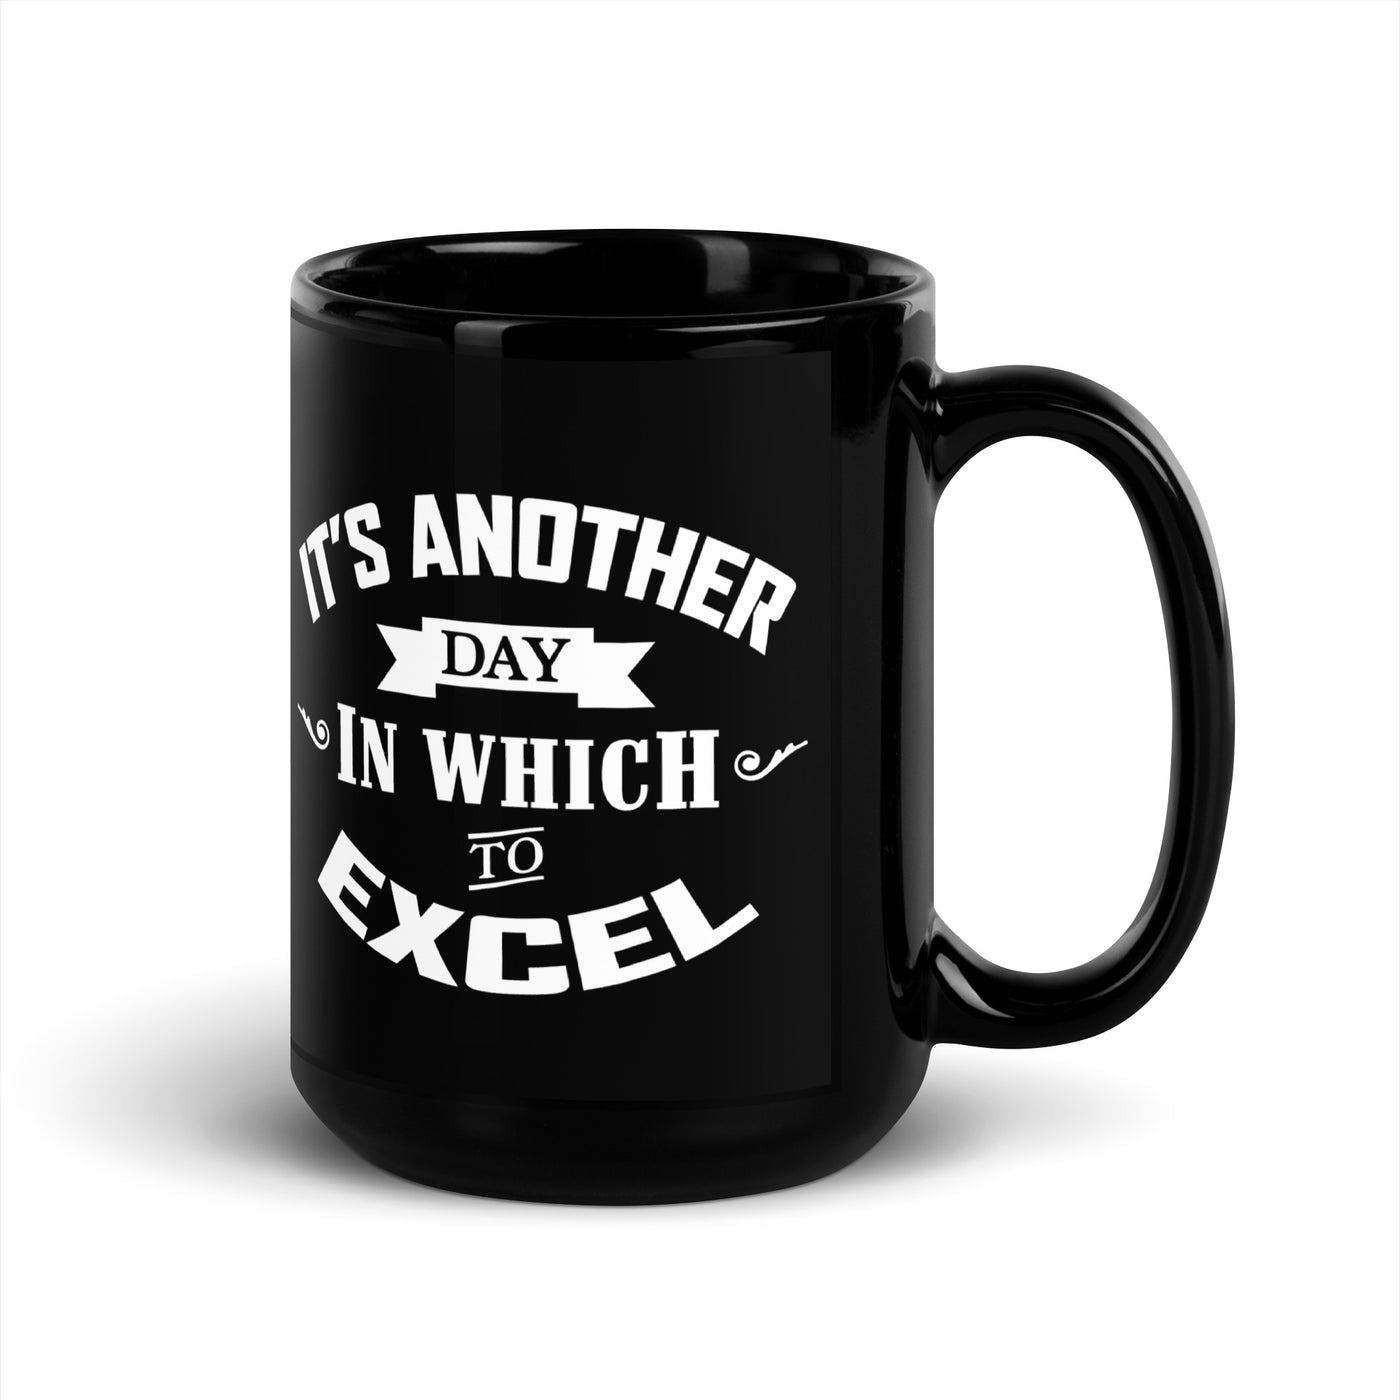 It's Another Day To Excel Mug, 15oz